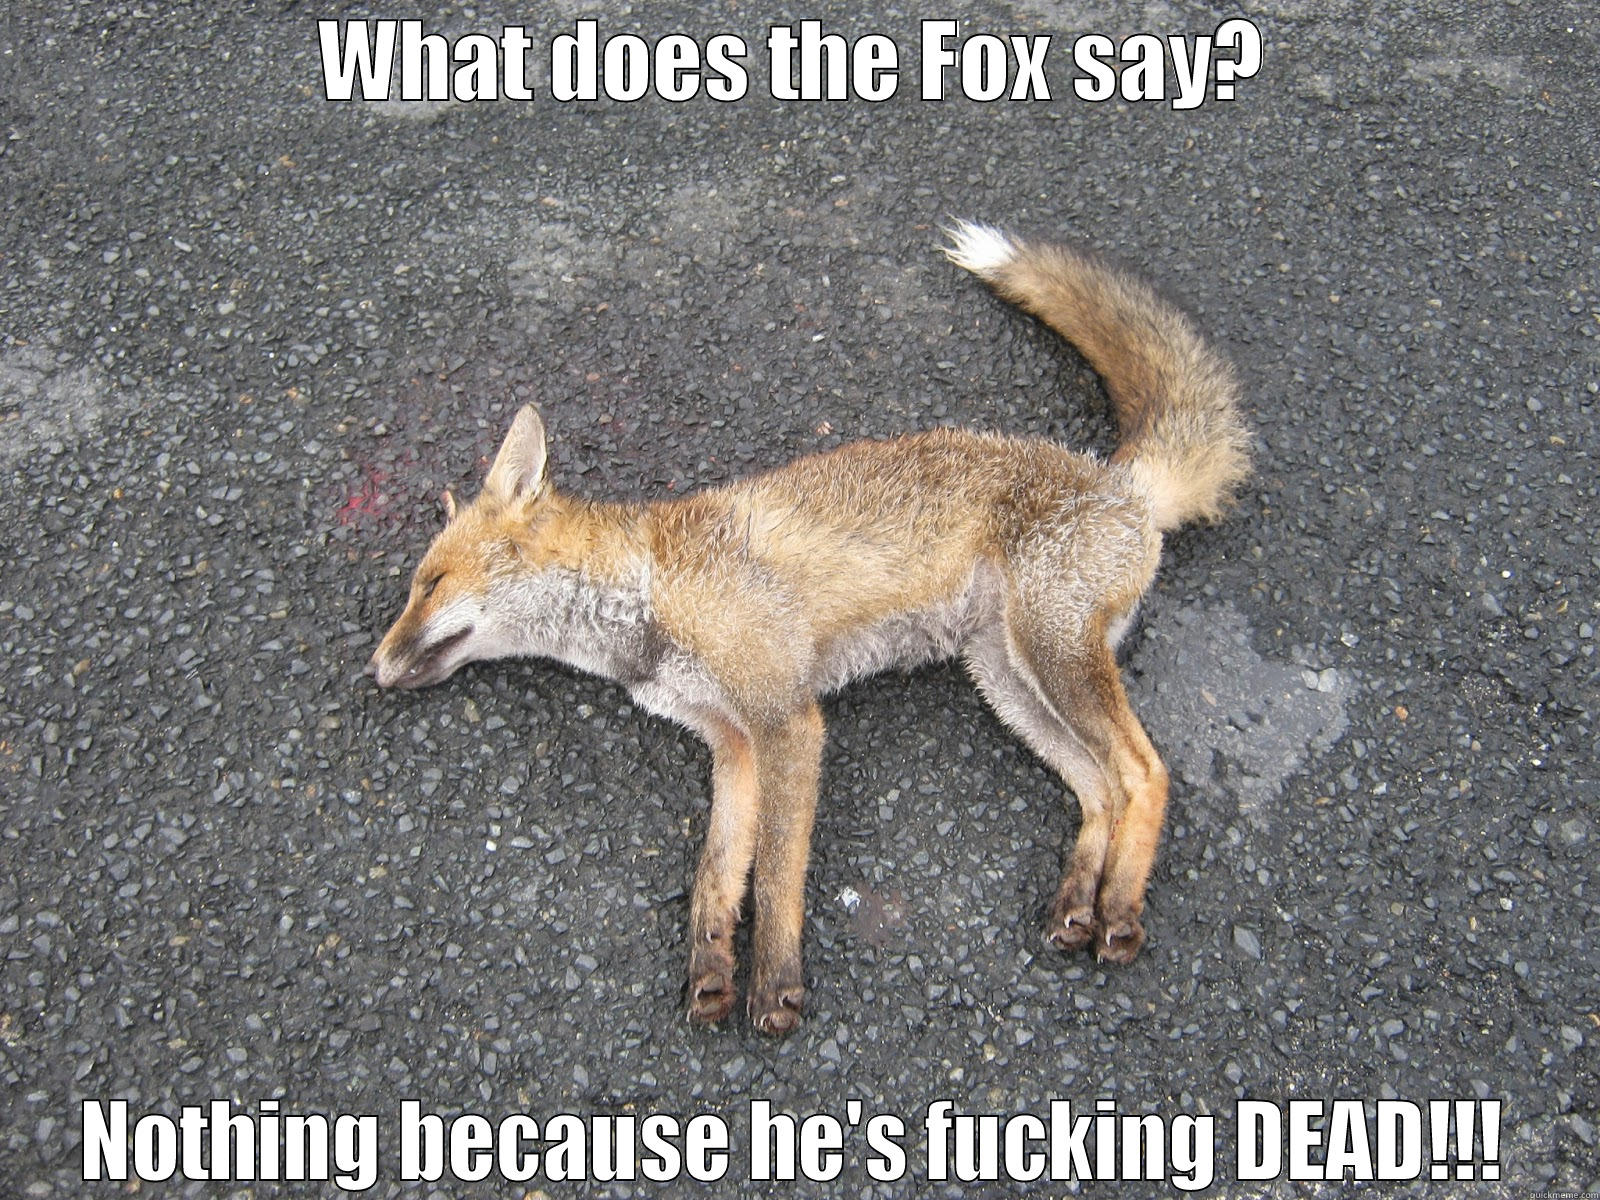 What does the Fox say? - WHAT DOES THE FOX SAY? NOTHING BECAUSE HE'S FUCKING DEAD!!! Misc